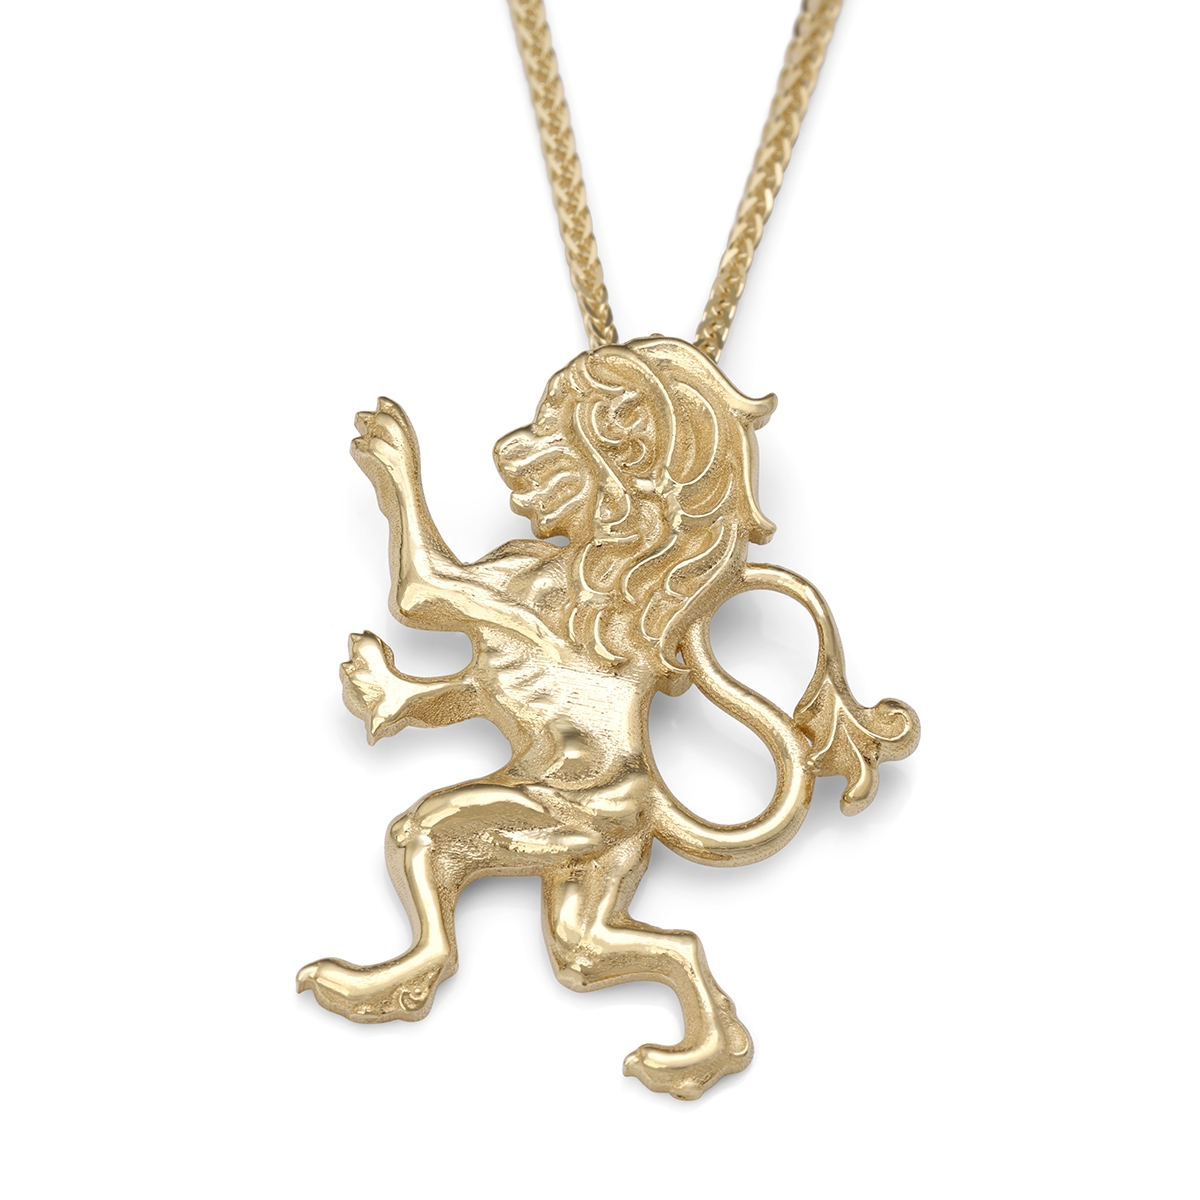 Handcrafted 14K Yellow Gold Lion of Judah Pendant Necklace - 1